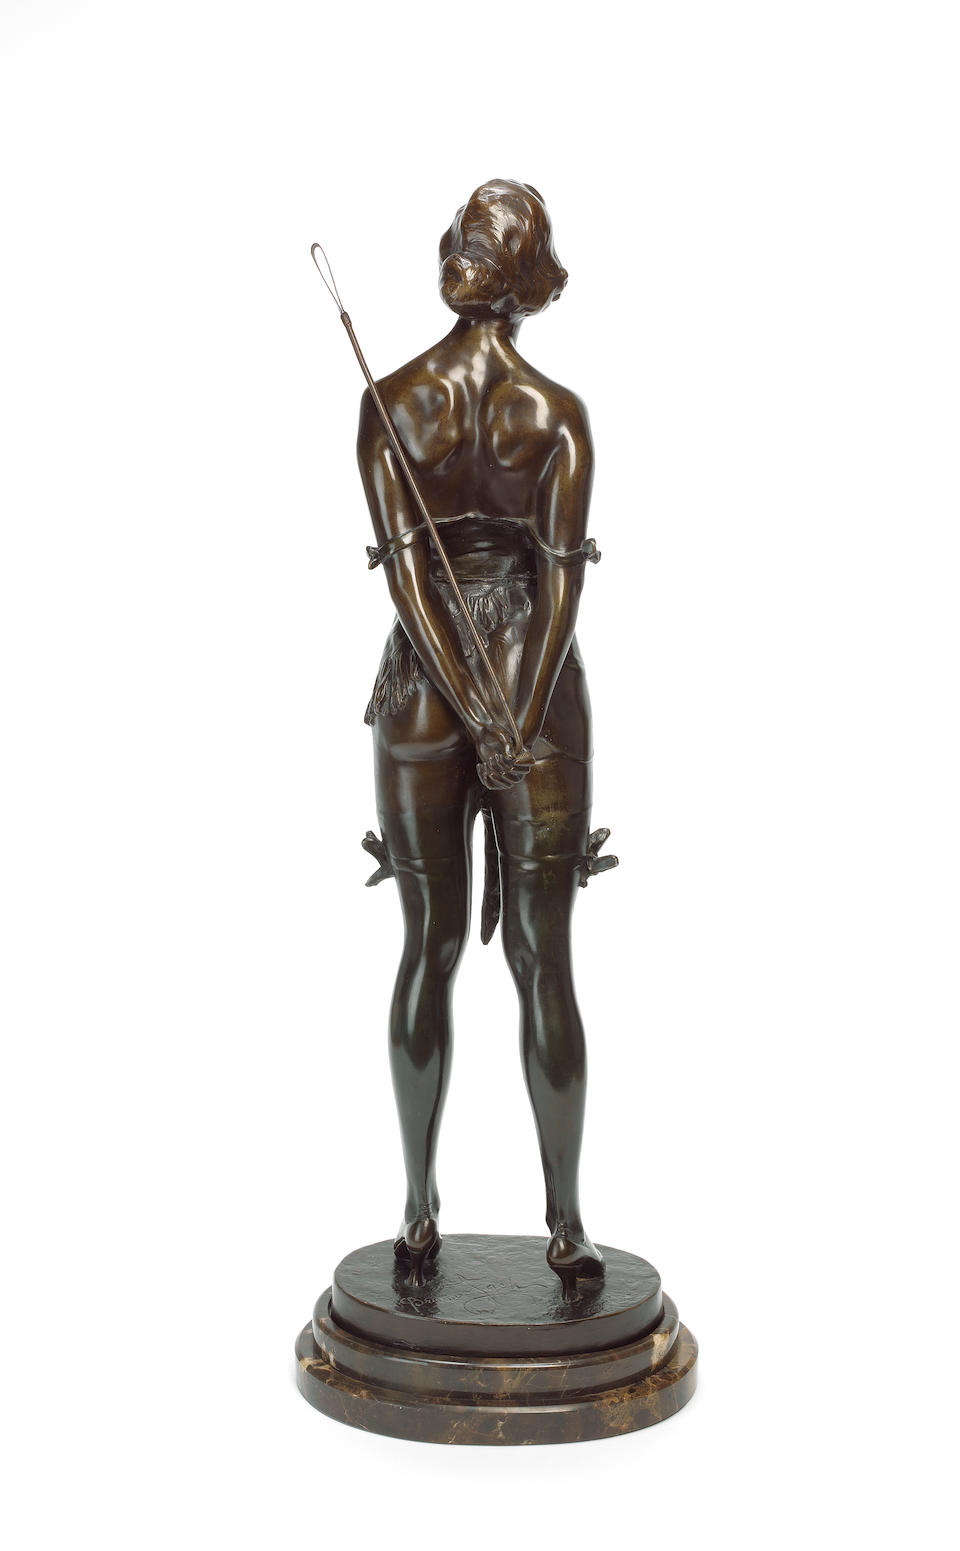 'The Riding Crop' an Erotic Patinated Bronze Study by Bruno Zach (German, 1891-1935) SIGNED IN CAST 'BRUNO ZACH'; CIRCA 1925